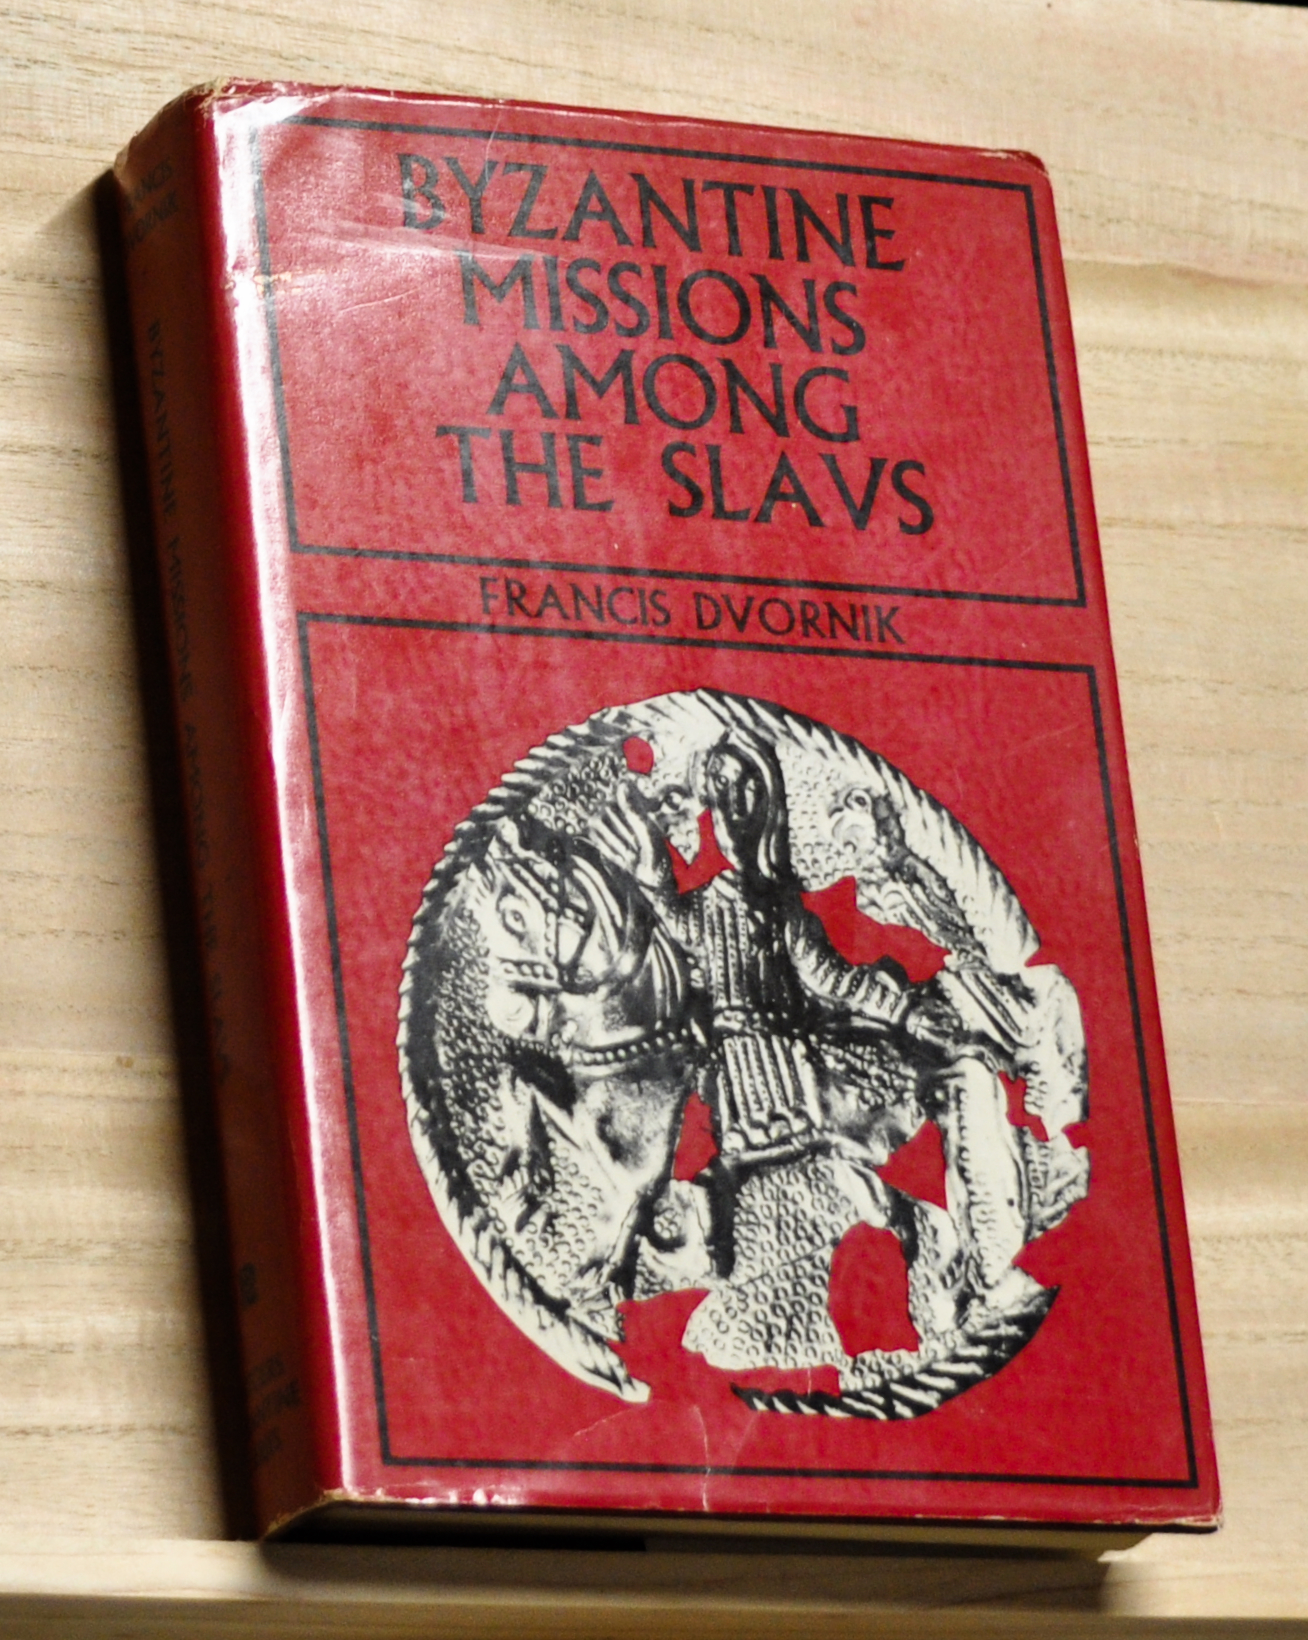 Byzantine Missions among the Slavs: SS Constantine-Cyril and Methodius - Dvornik, Francis